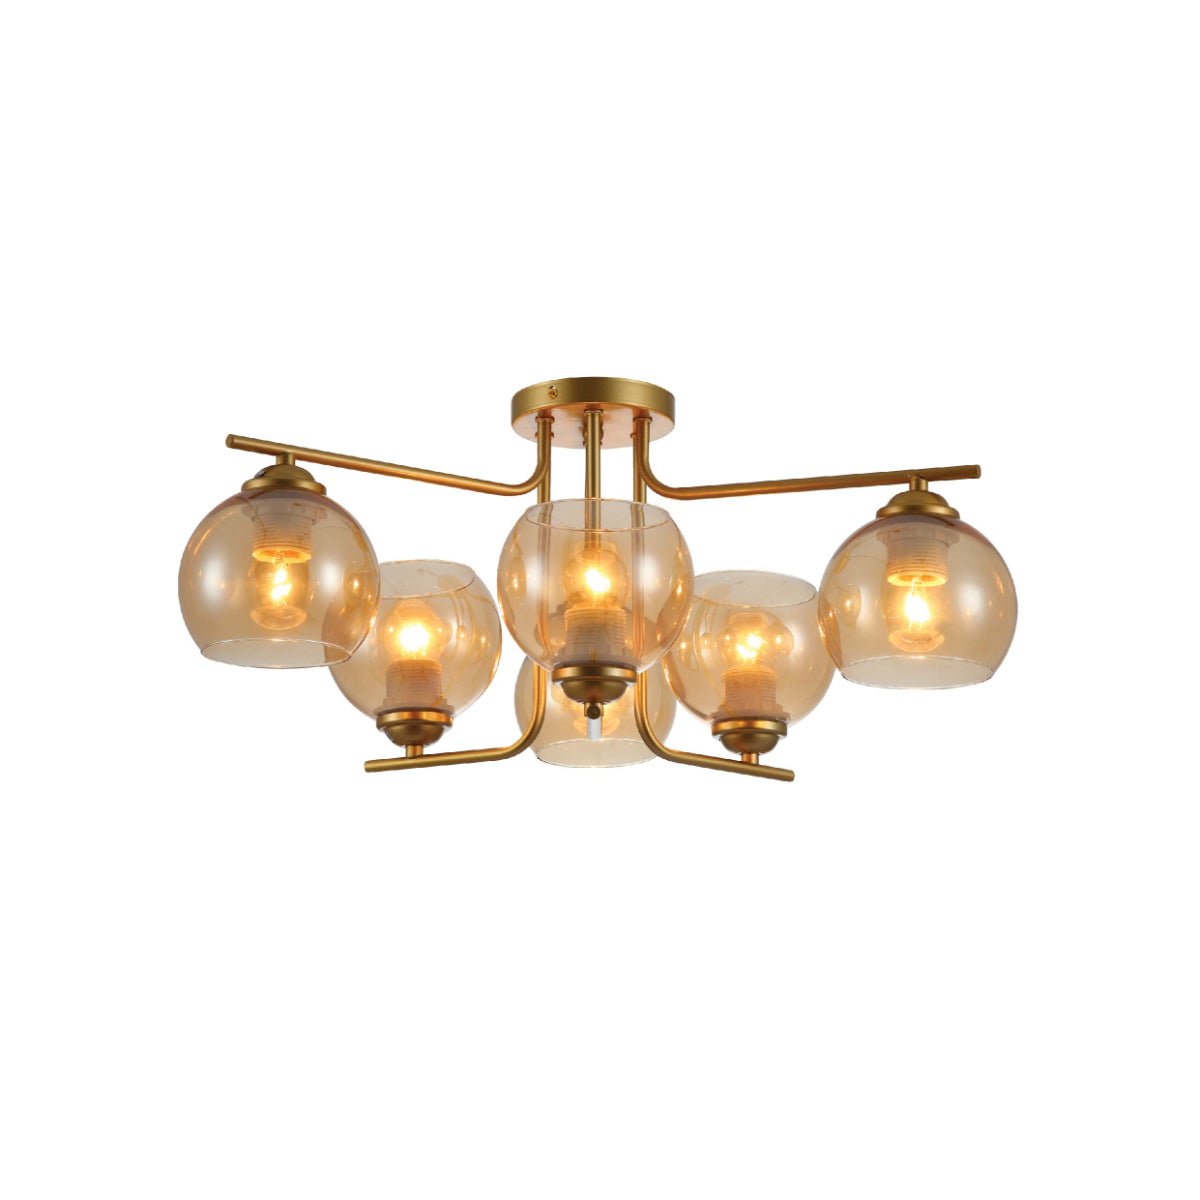 Main image of Gold L shape Metal Amber Dome Glass Ceiling Light with E27 Fittings | TEKLED 159-17630